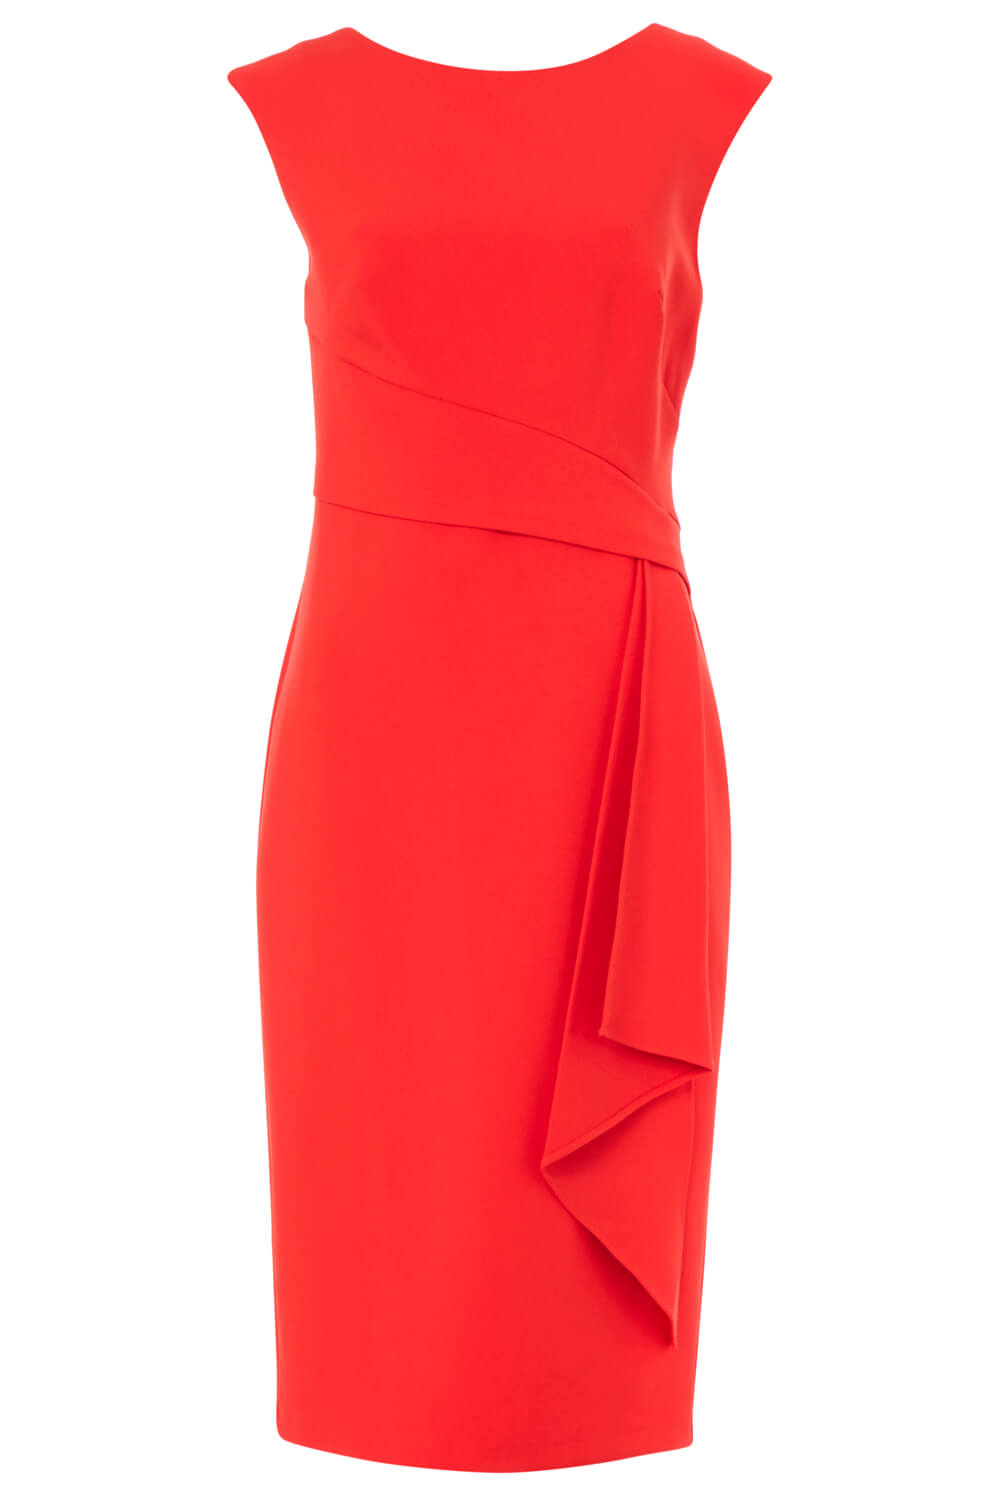 Red Ruched Waist Cocktail Dress, Image 5 of 5